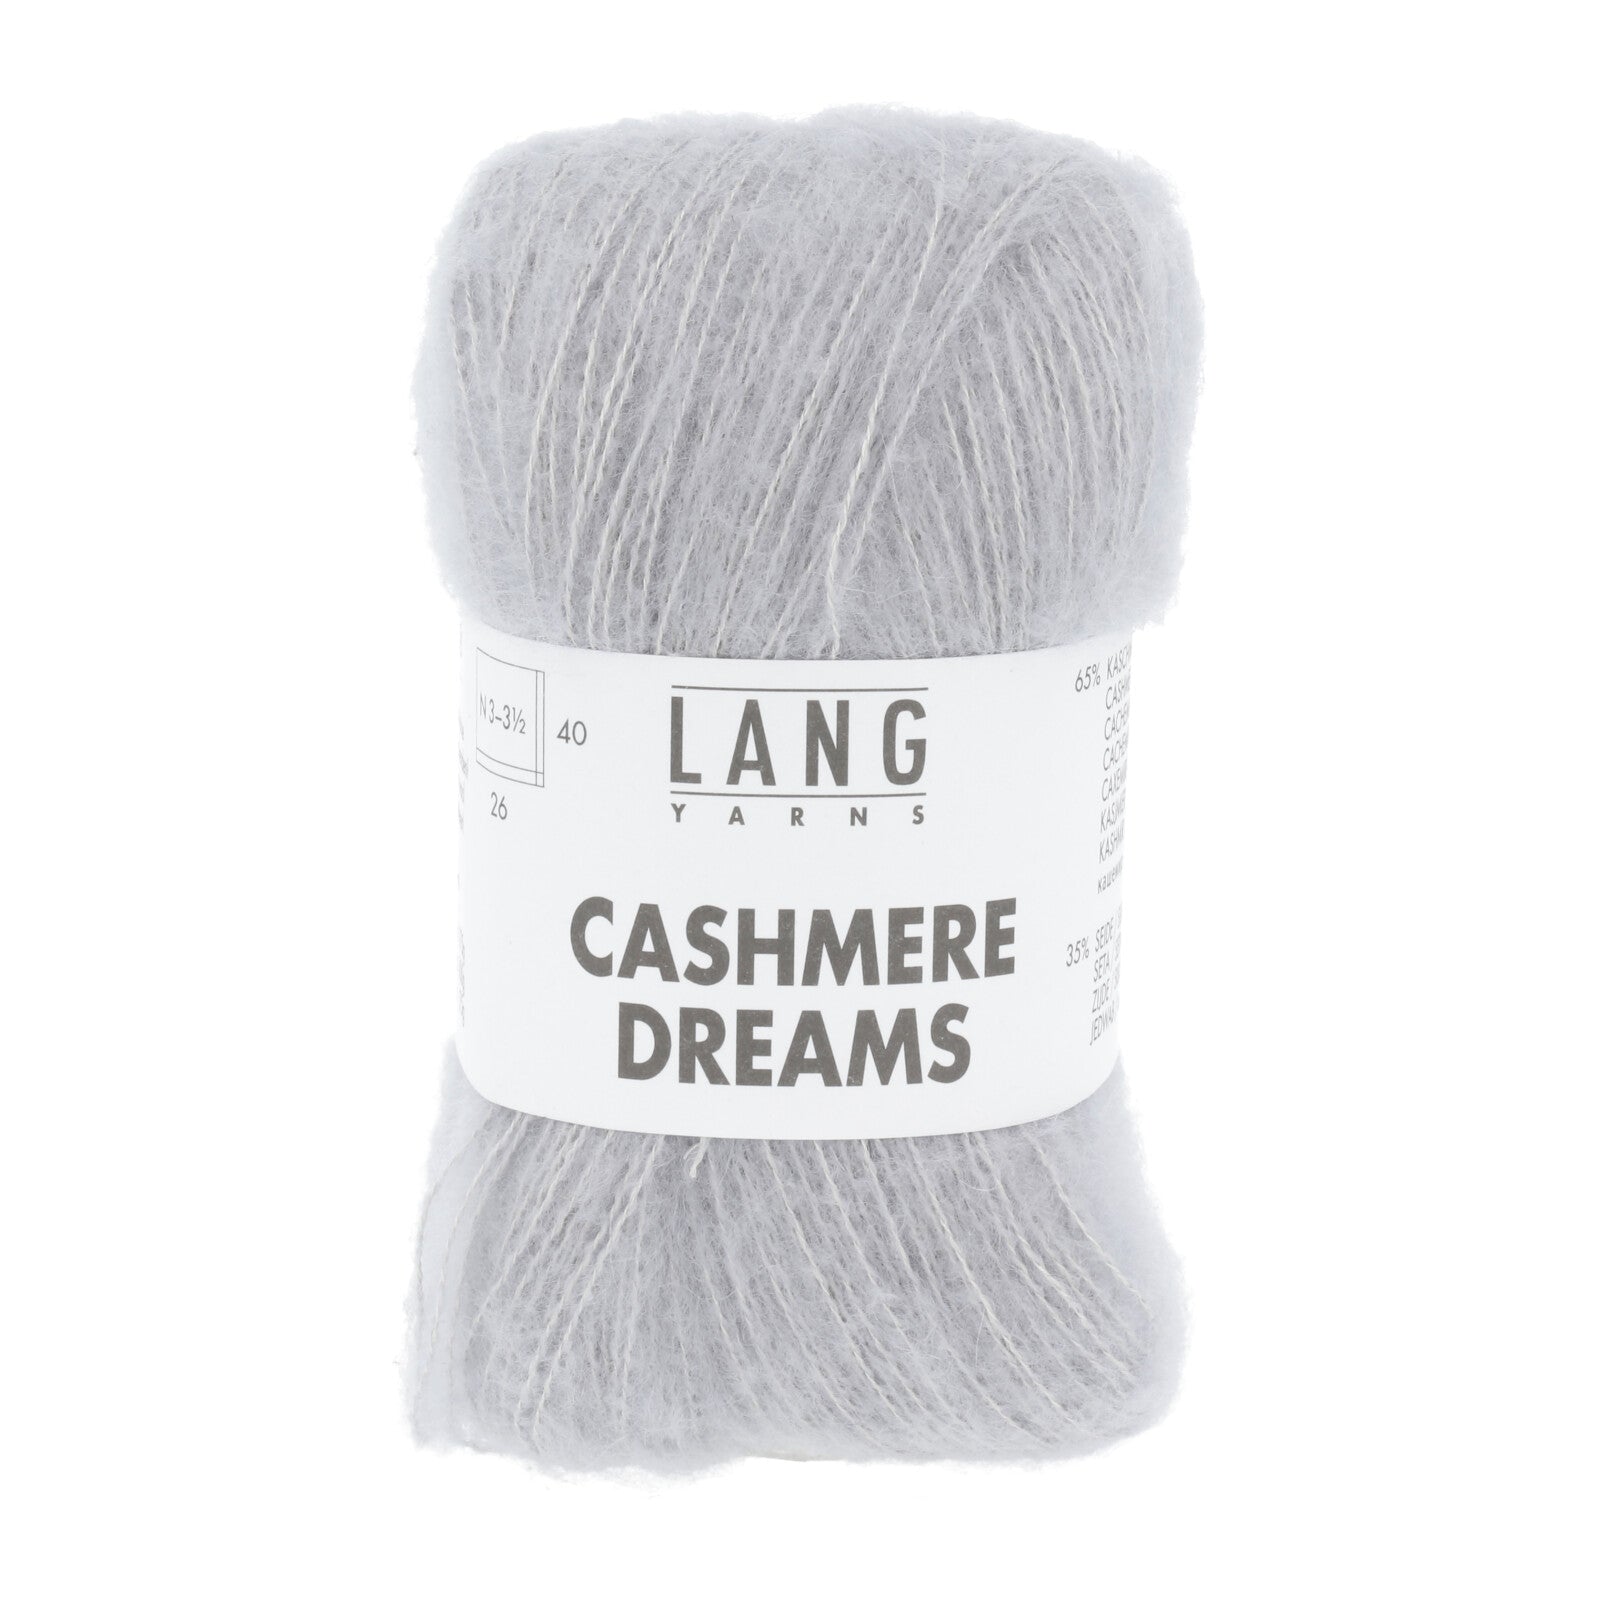 Buy cashmere wool BIG Lang Yarns - super thick NS 9-10 mm online –   by CASHMERE & CO